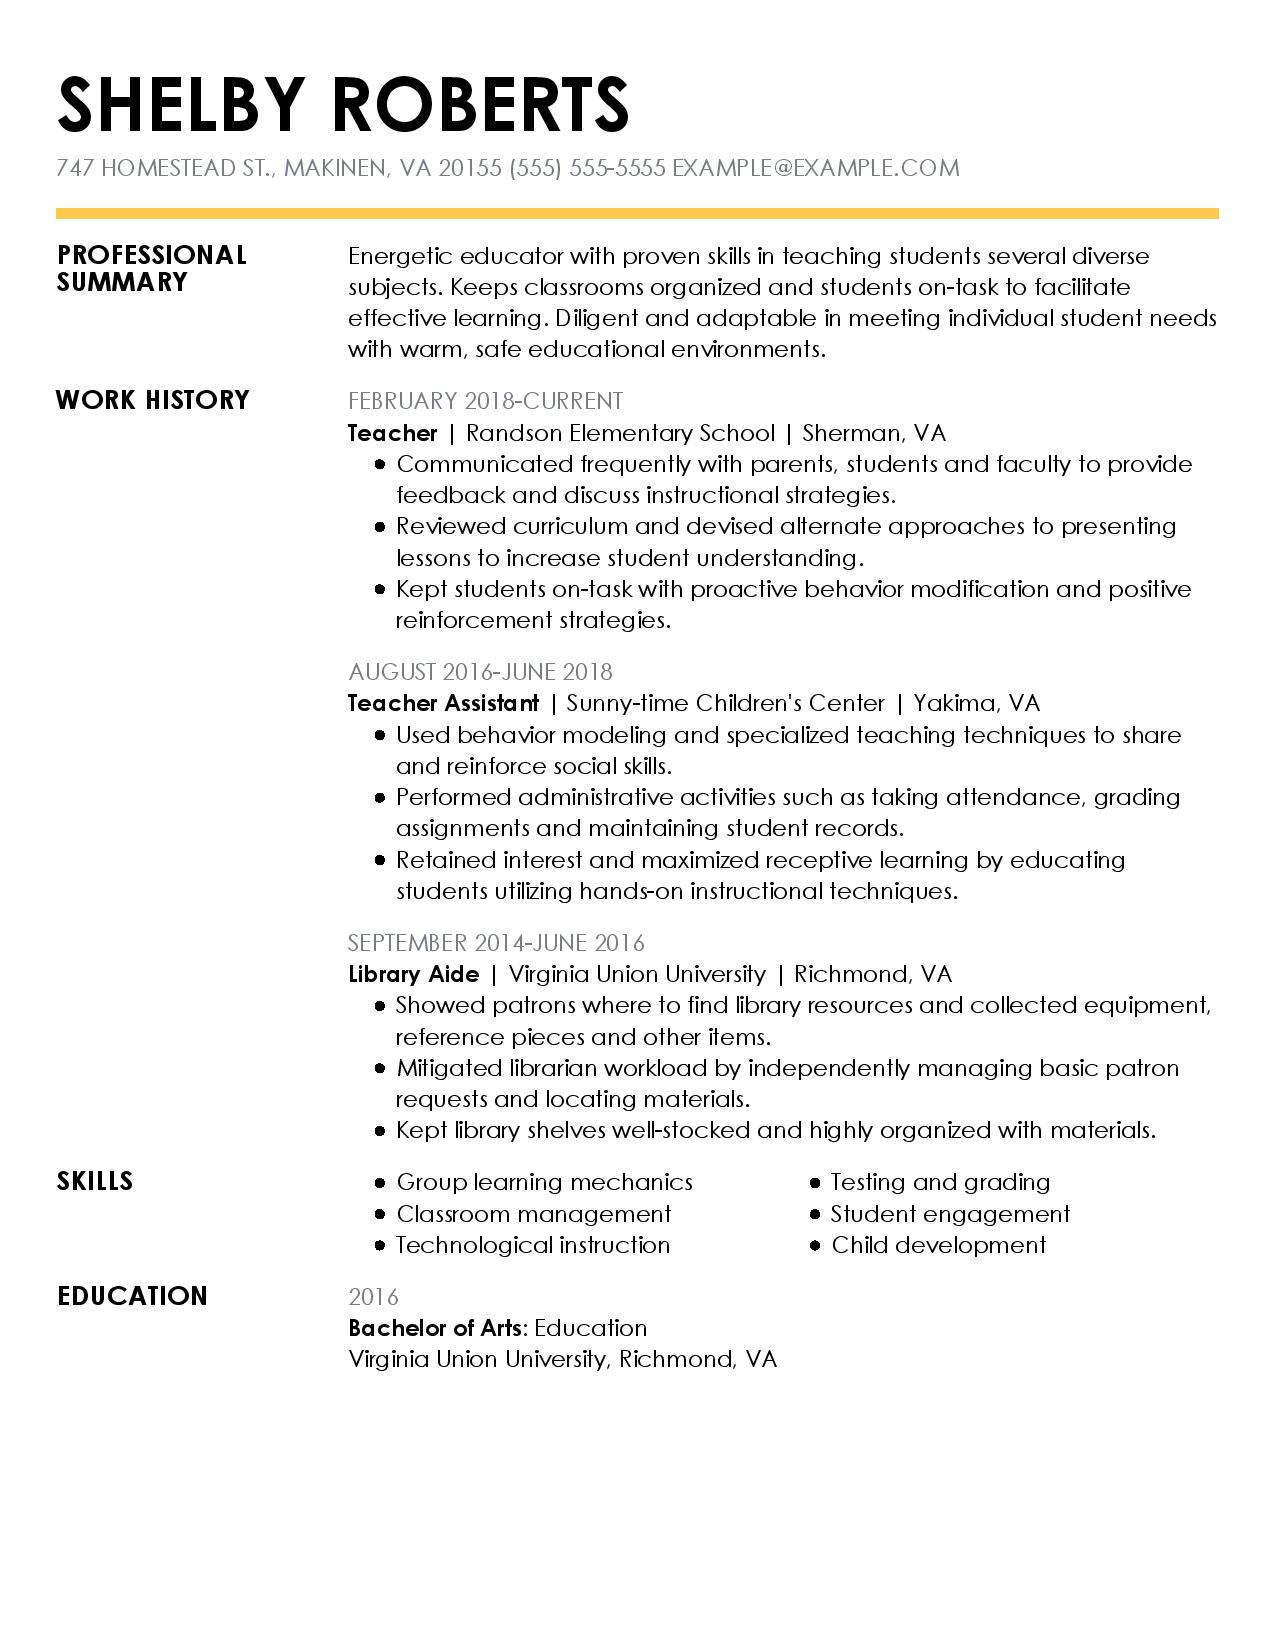 View 30 Samples Of Resumes Industry Experience Level inside sizing 1275 X 1650